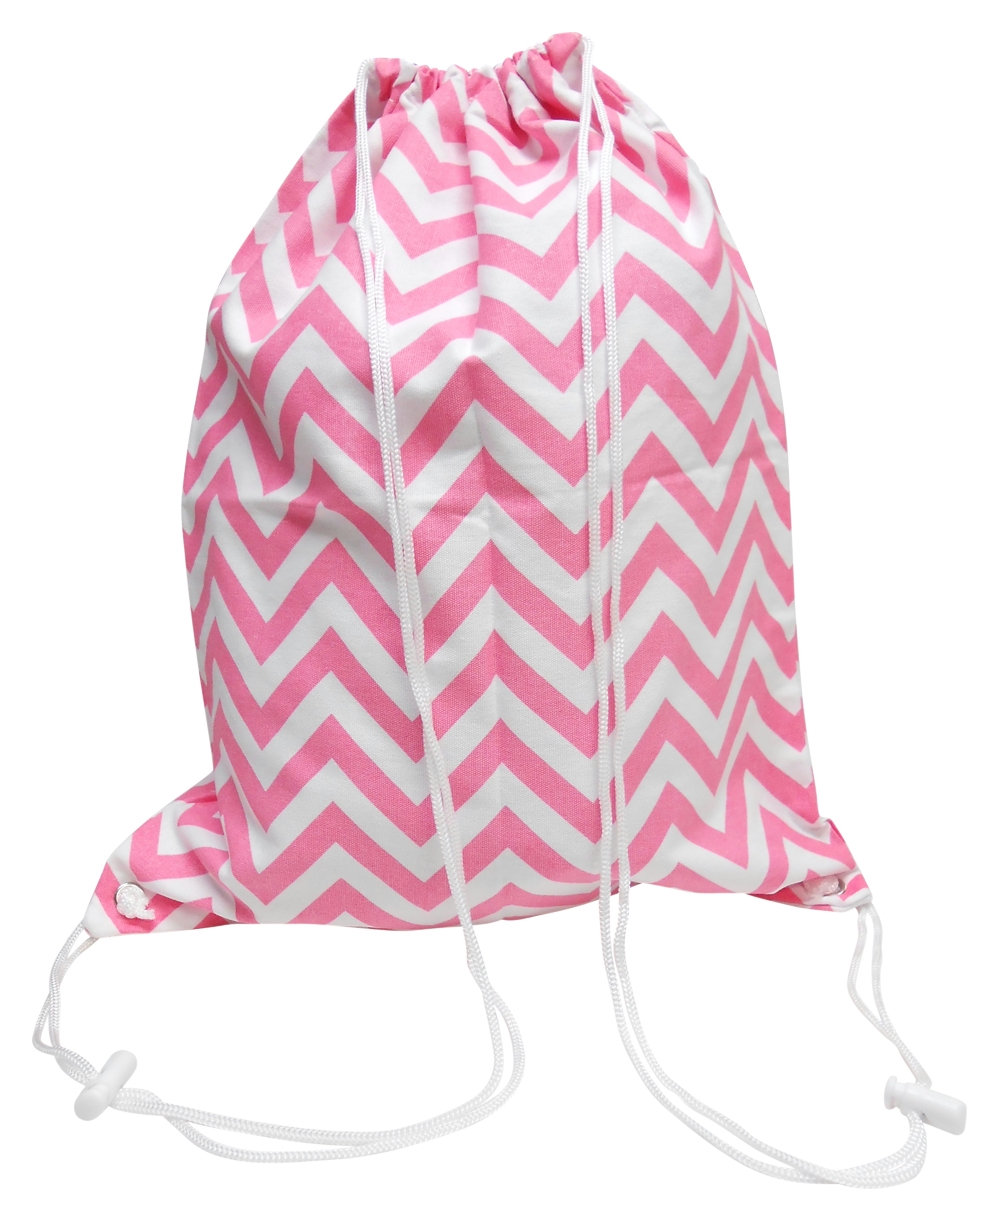 Gym Bag Drawstring Pack Embroidery Blanks in Chevron Print - HOT PINK